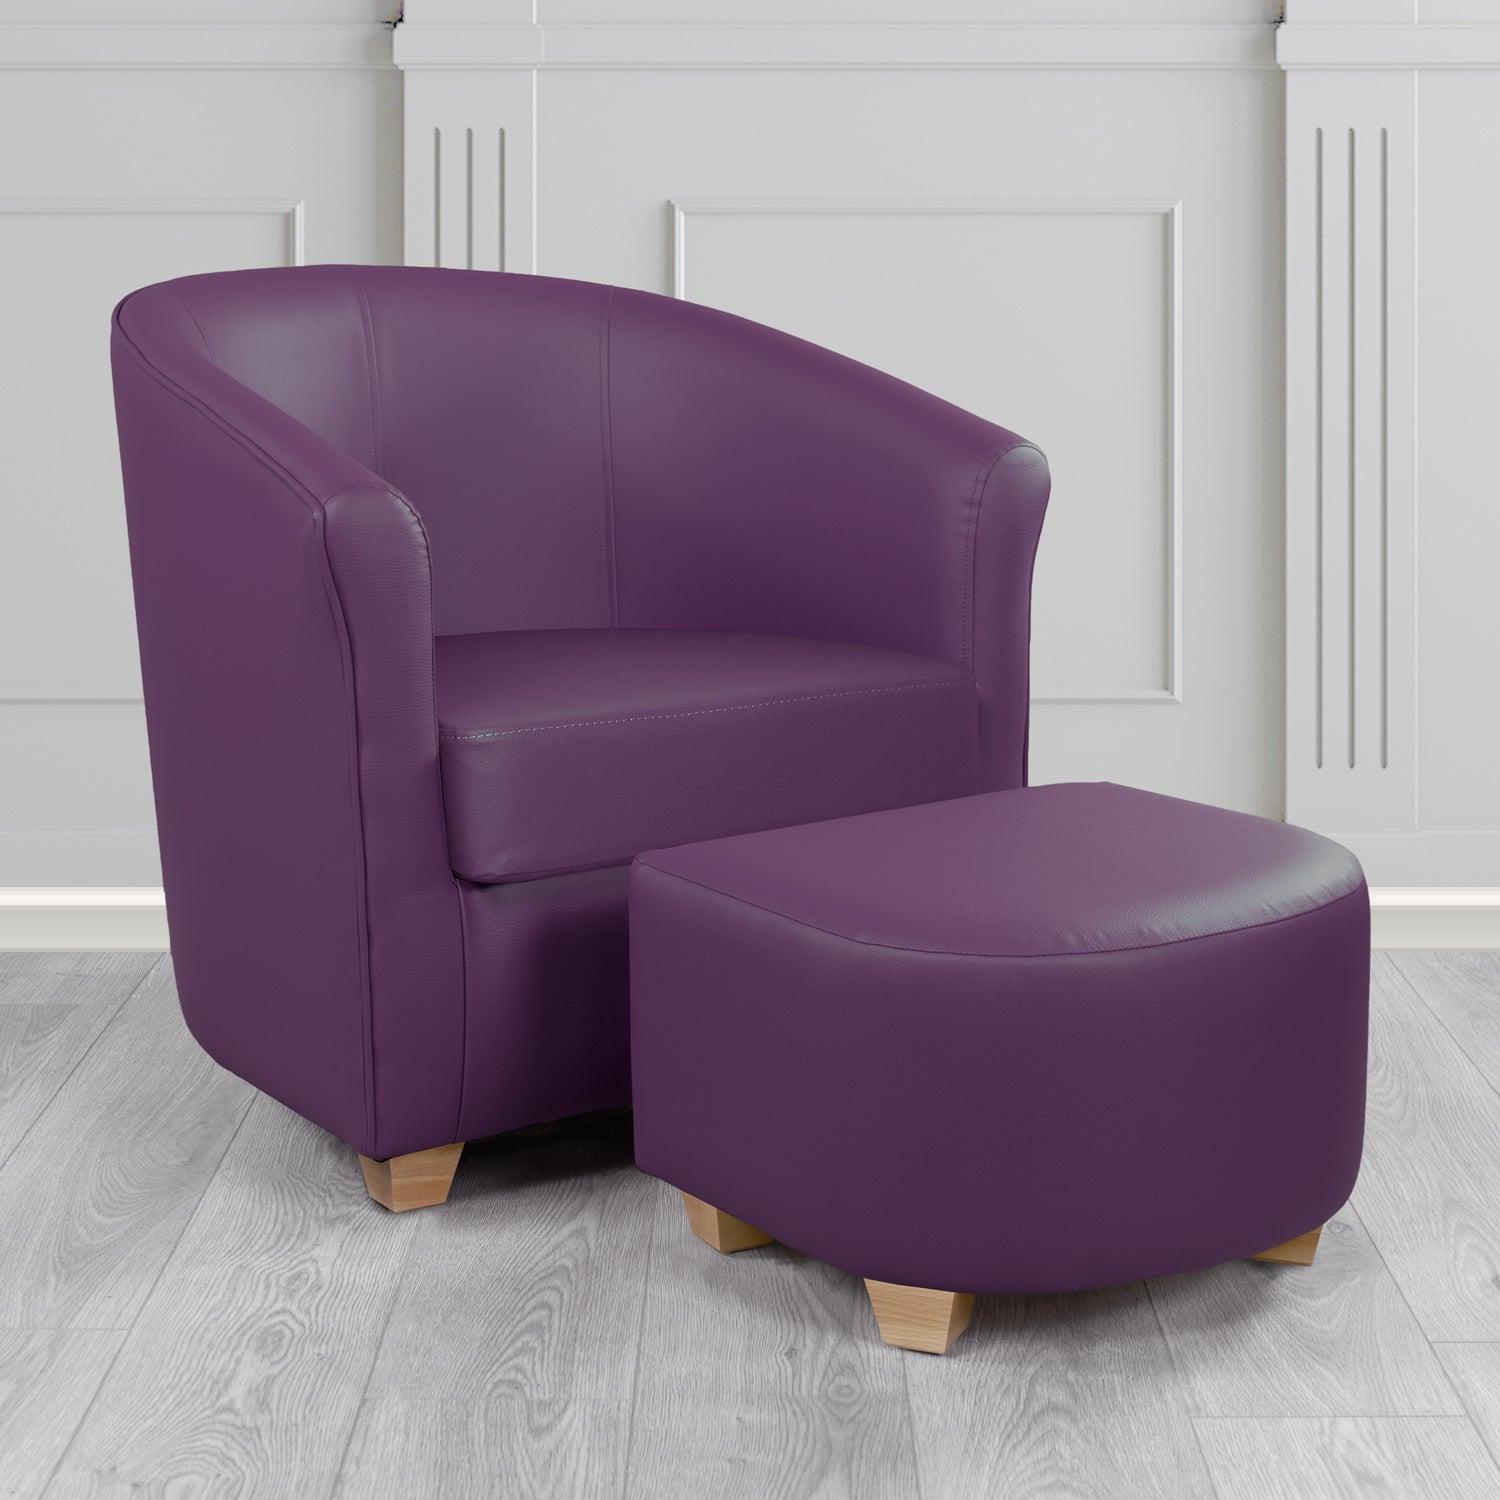 Cannes Tub Chair with Footstool Set in Just Colour Damson Crib 5 Faux Leather - The Tub Chair Shop